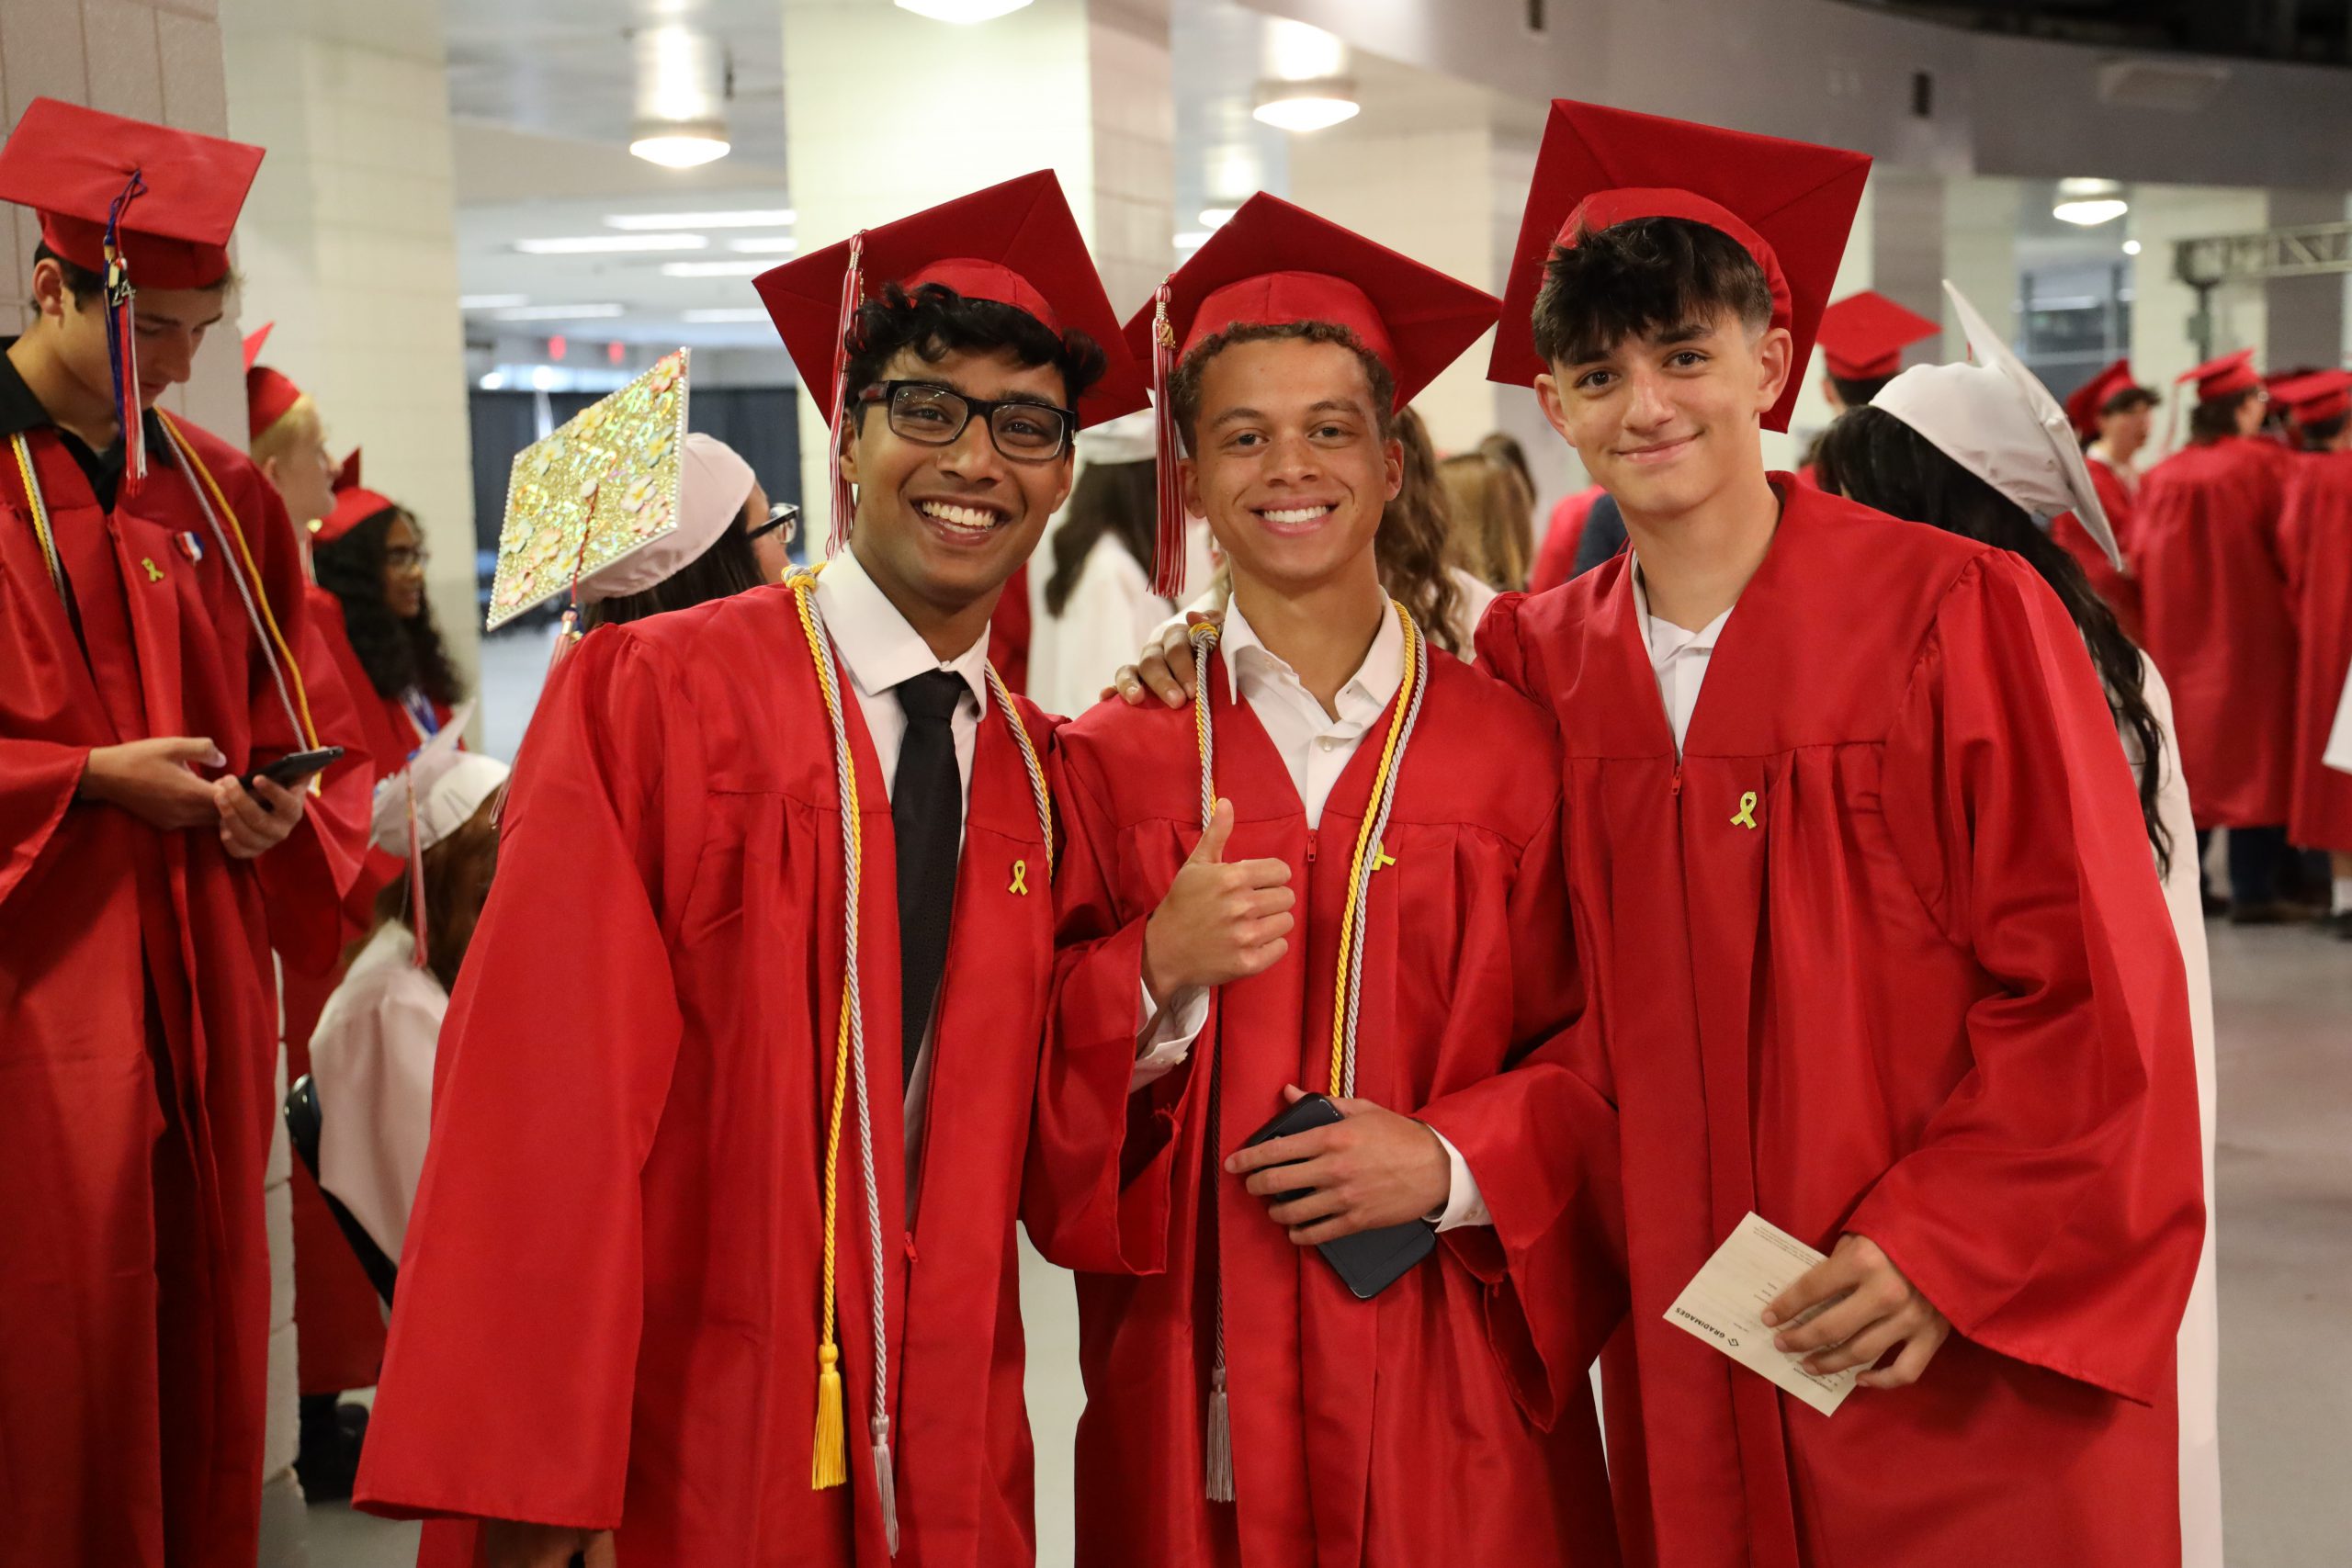 Three graduates wearing red caps and gowns are smiling together for a group photo. The boy in the middle is giving a thumbs up.